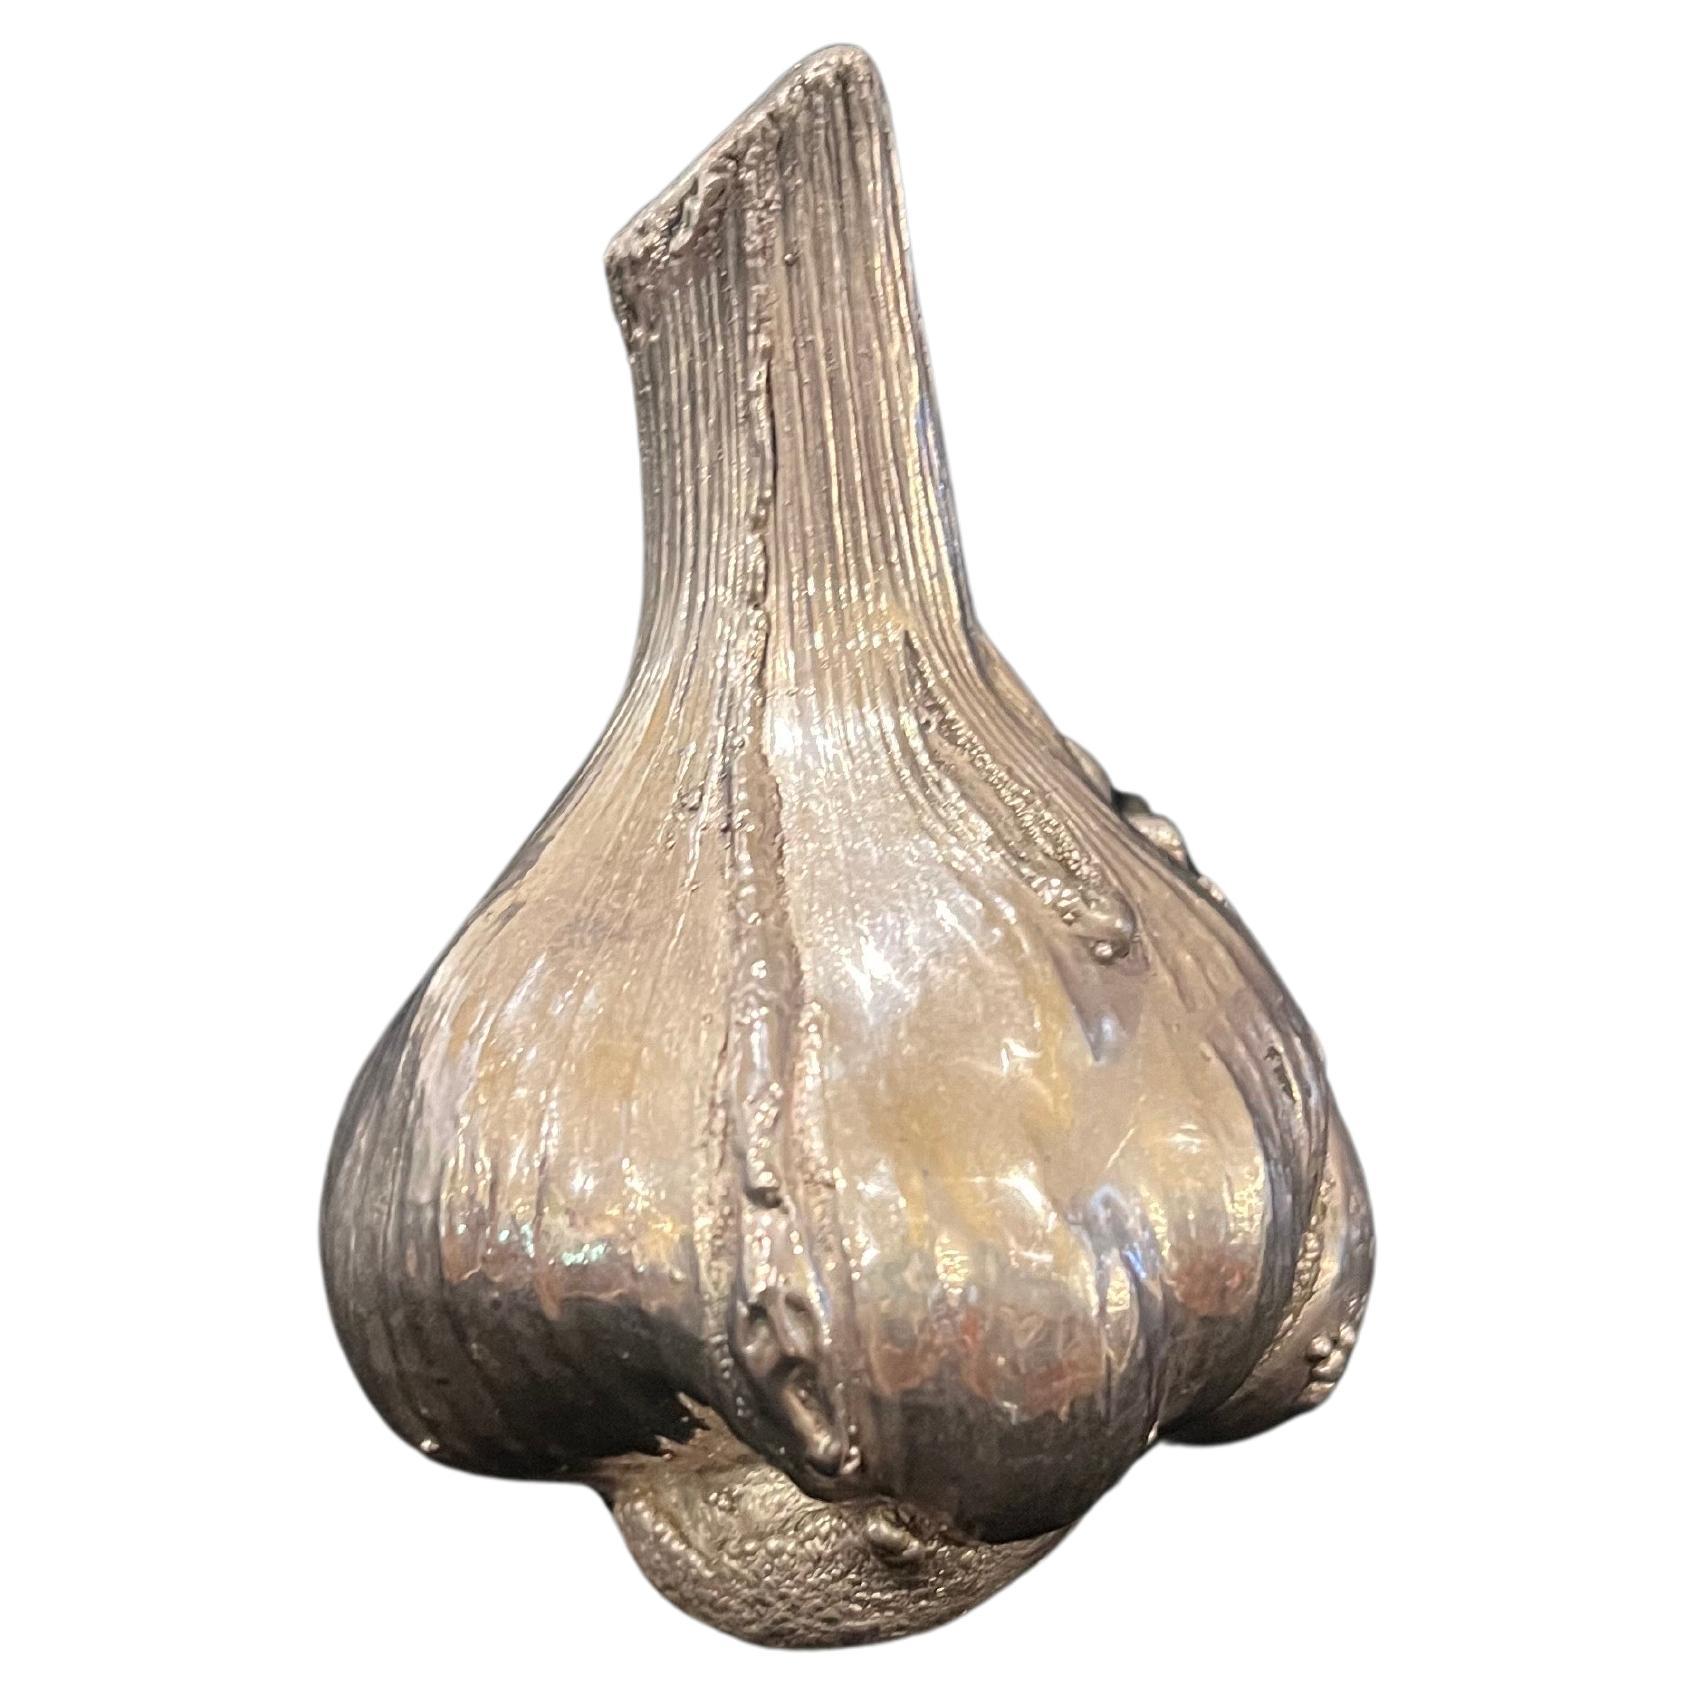 3 oz. .Sterling Silver Stamped 925 Garlic Sculpture Italy For Sale